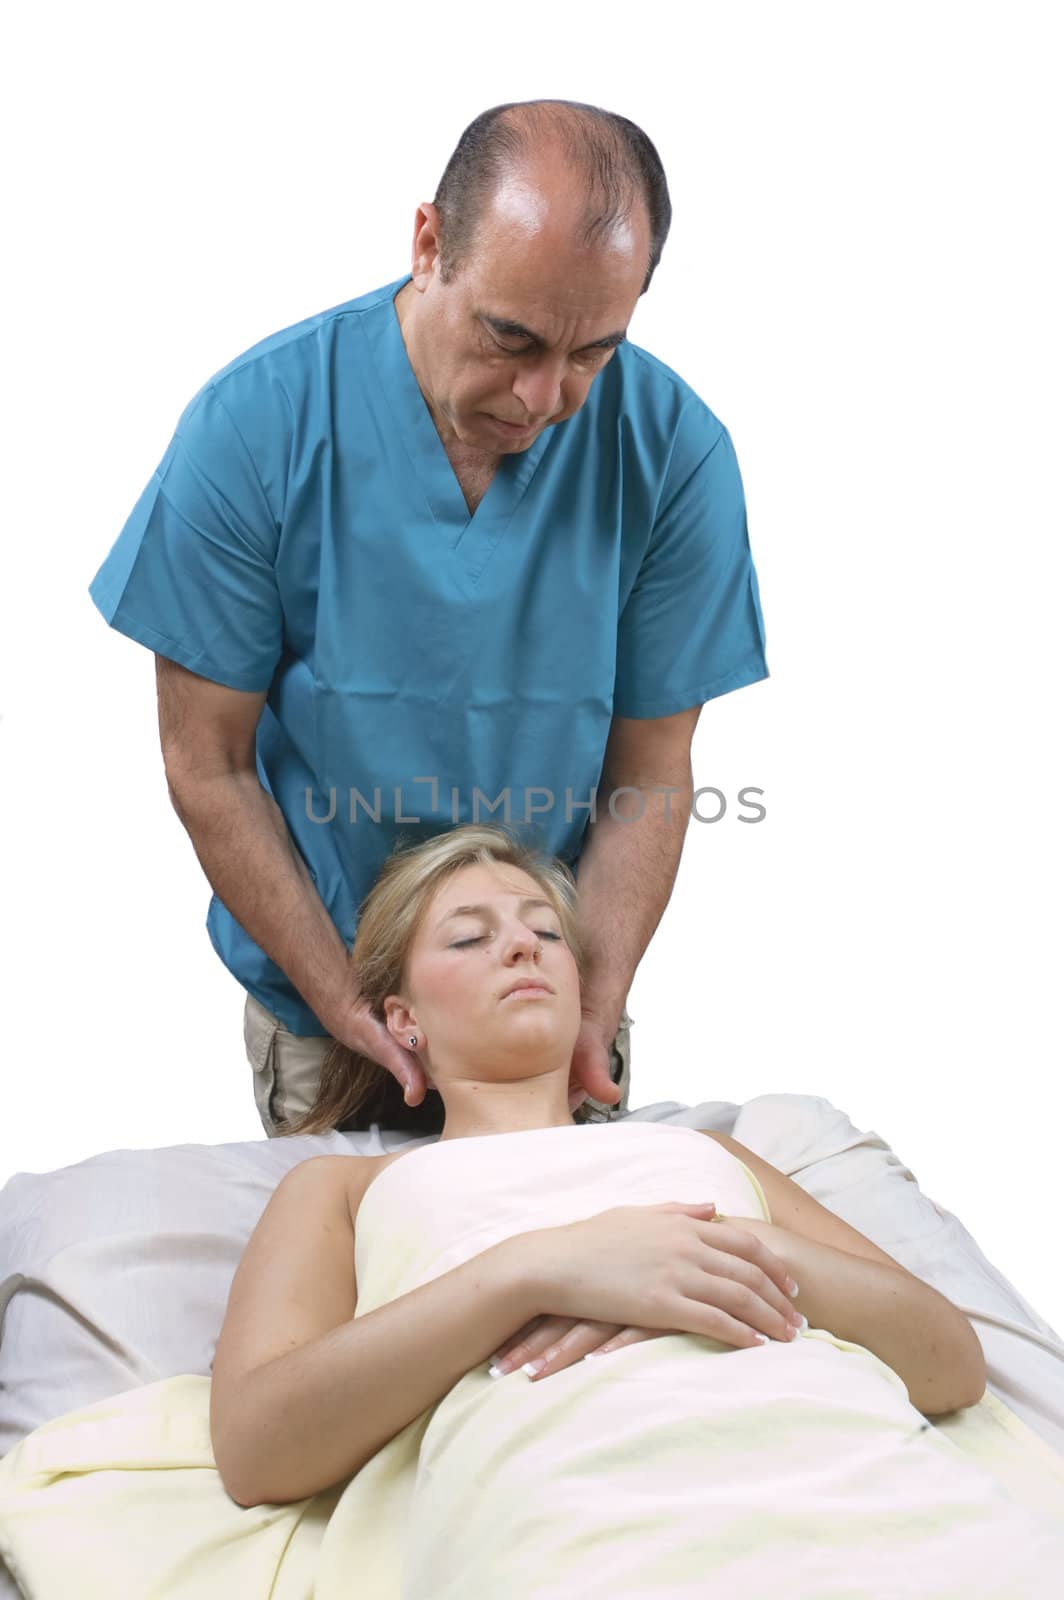 young woman getting Massage Therepy from a massuer